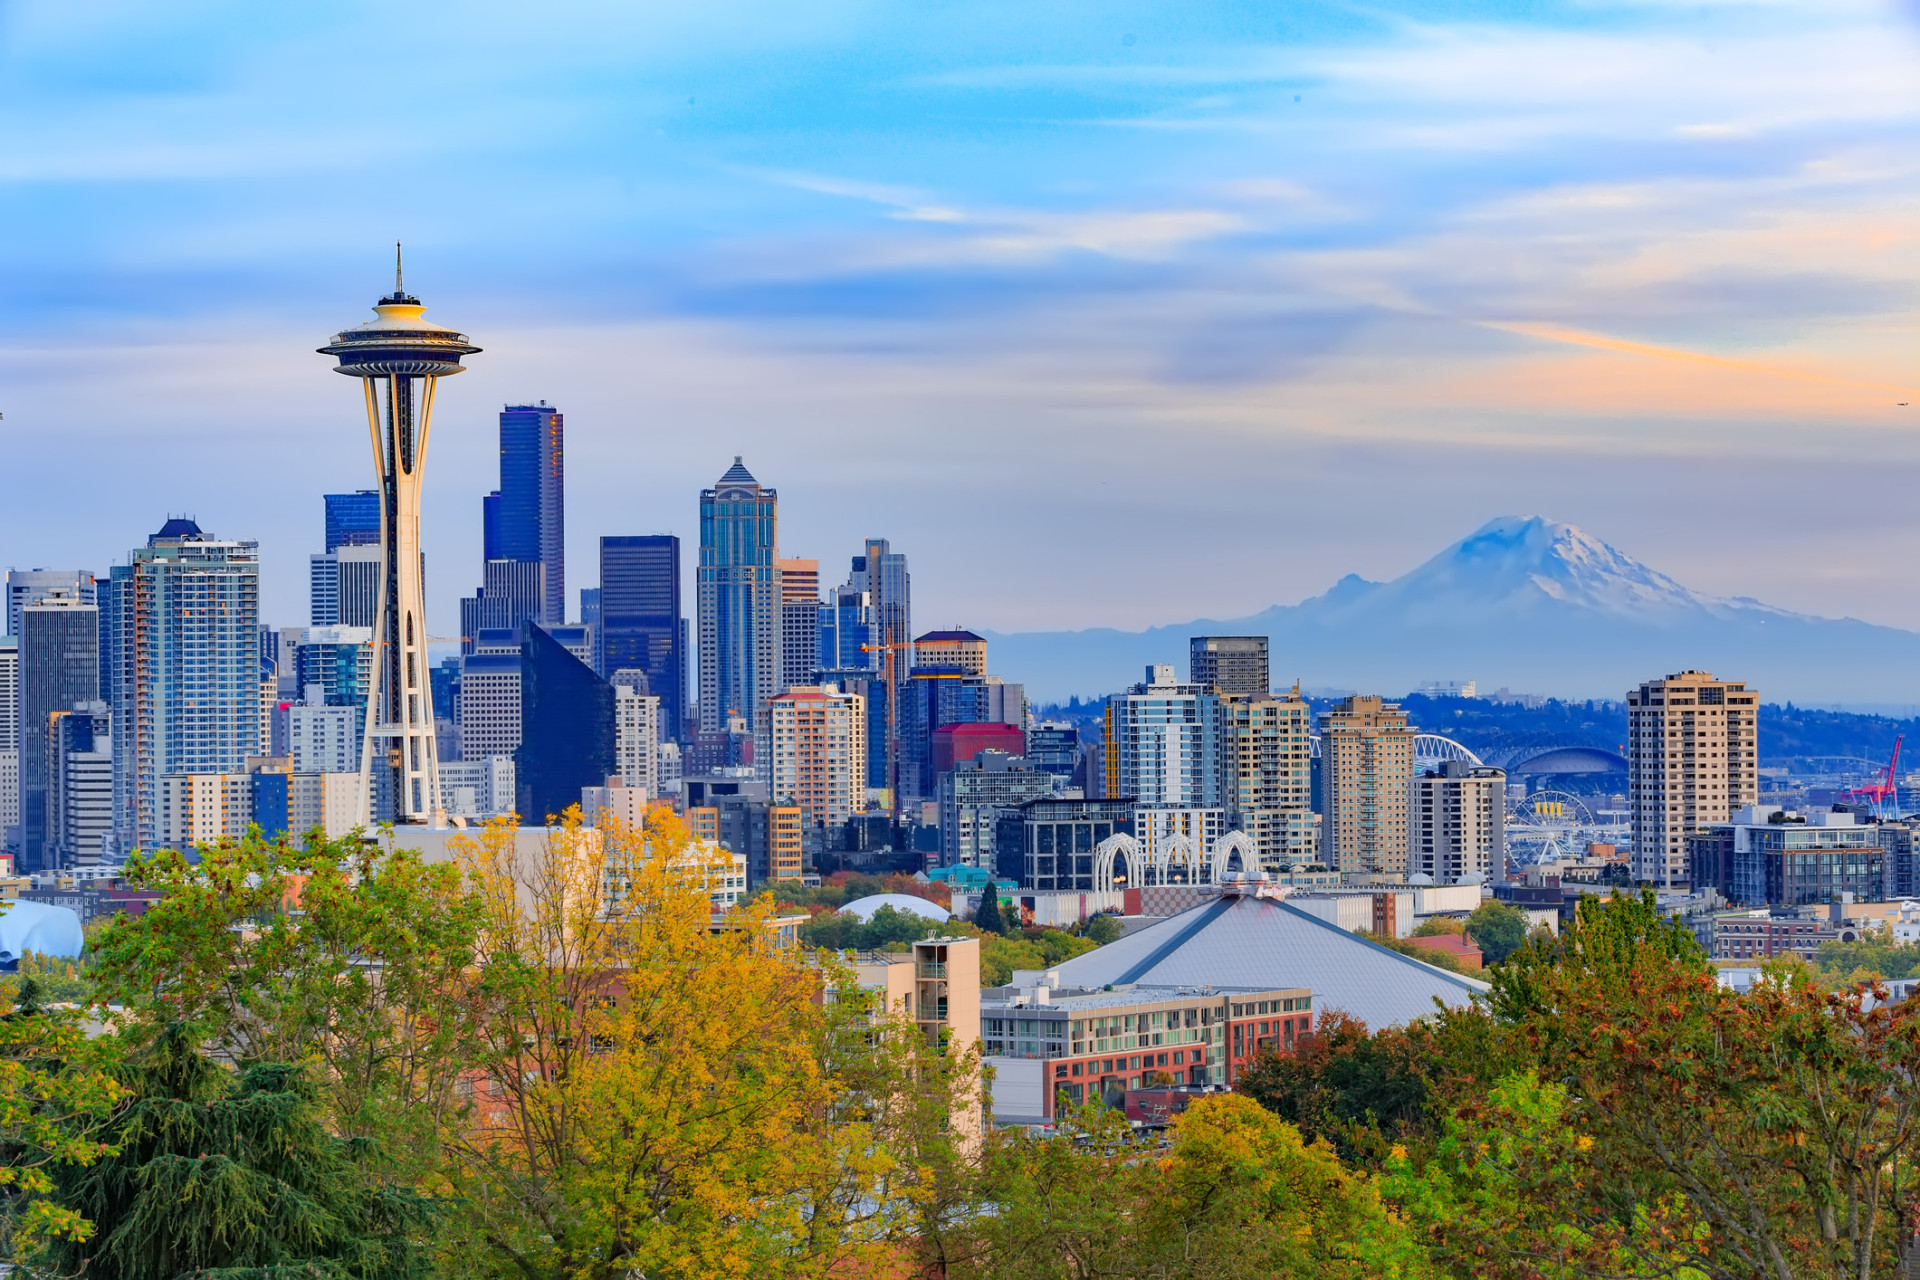 Vibrant Seattle offers not only beautiful scenery but also a vast array of activities and places to visit, such as the iconic Space Needle and the bustling Pike Place Market.<p>You may also like:<a href="https://www.starsinsider.com/n/363655?utm_source=msn.com&utm_medium=display&utm_campaign=referral_description&utm_content=284295v5en-in"> Incredible mistakes in film and TV</a></p>